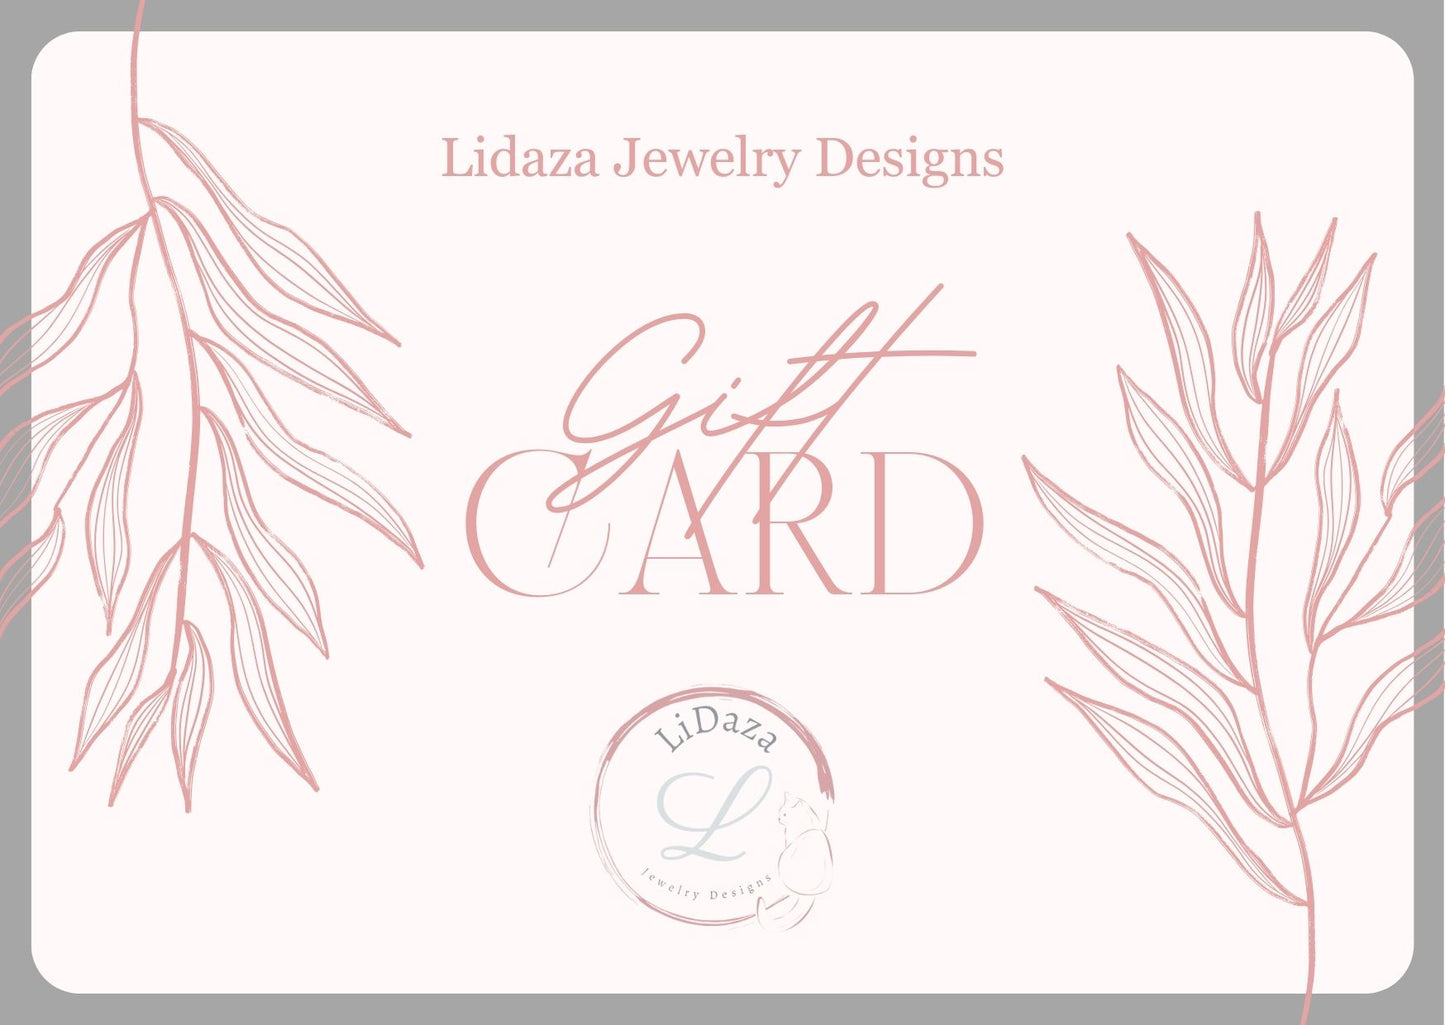 Lidaza Jewelry Designs Gift Card